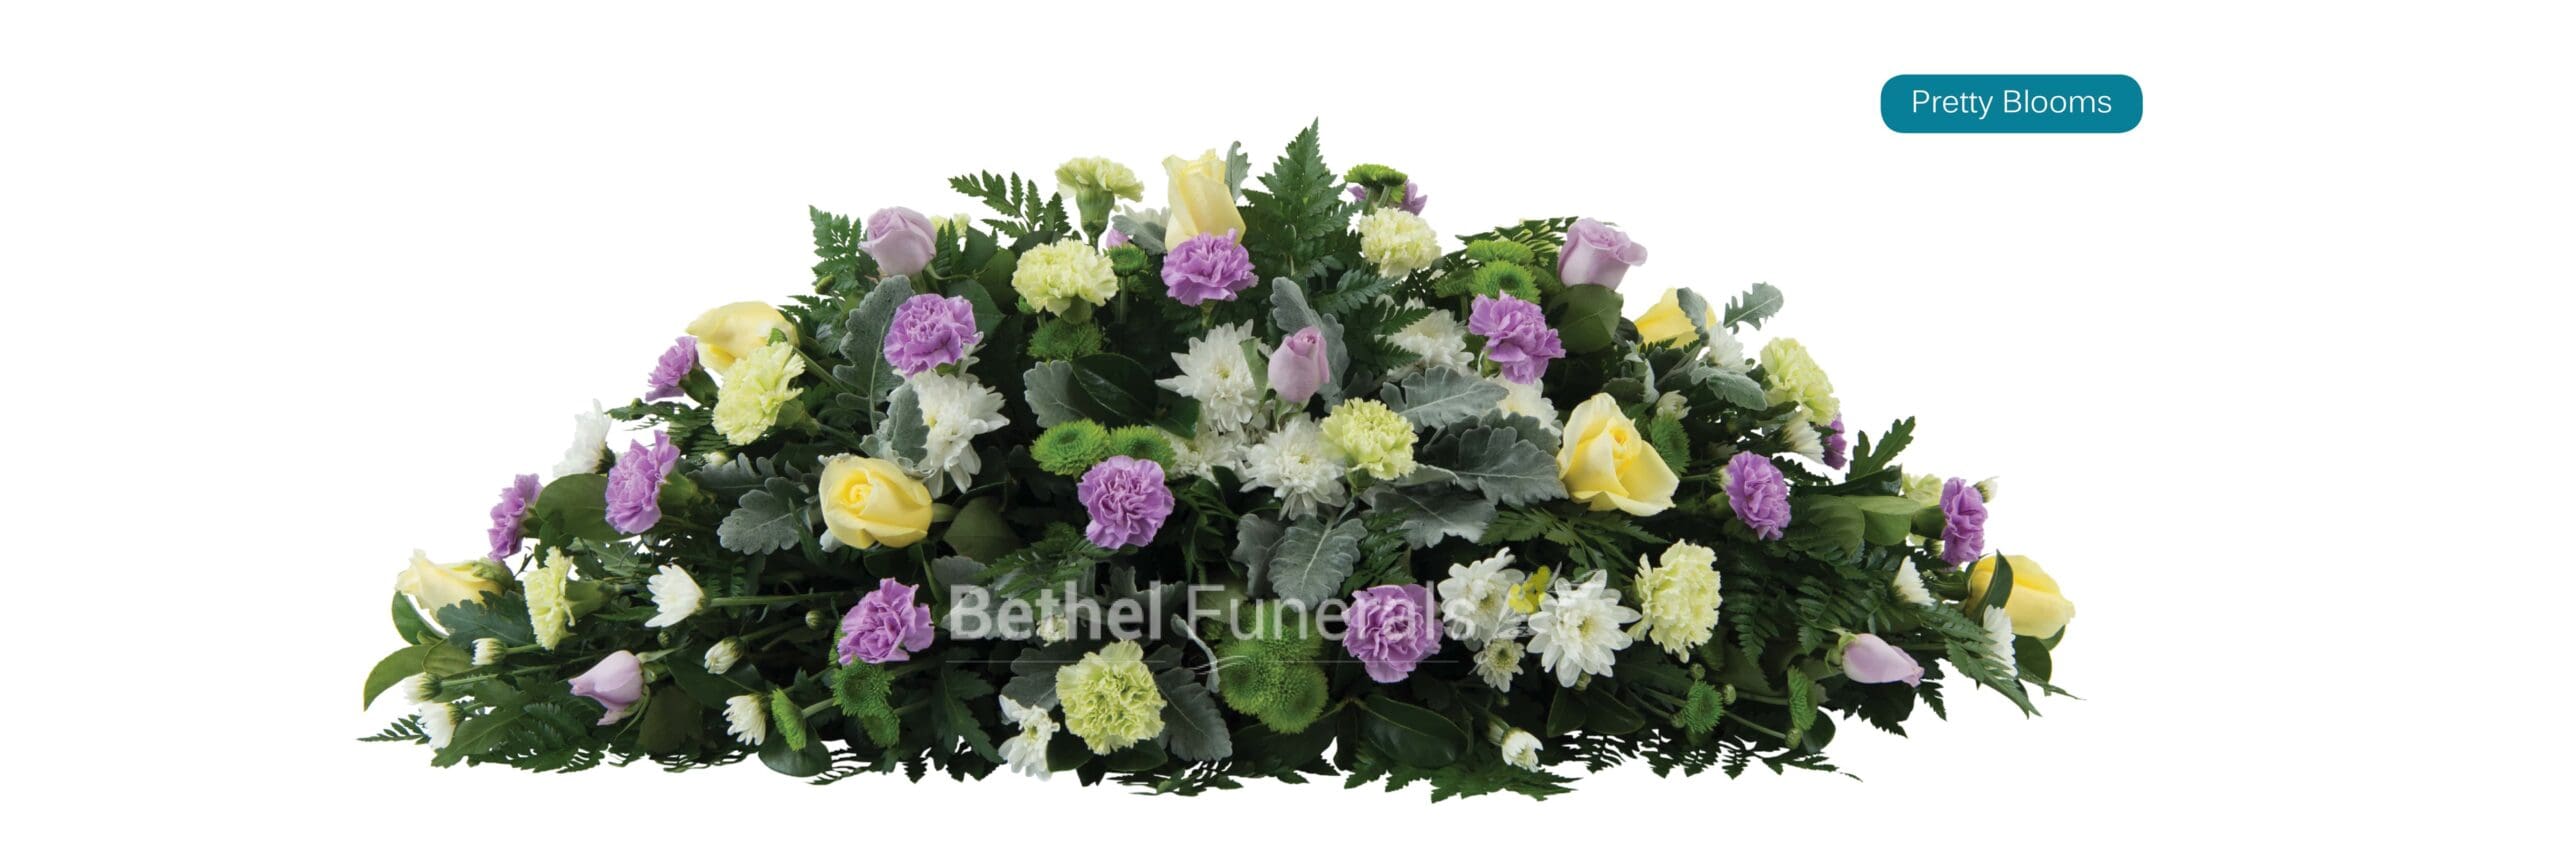 Pretty blooms funeral flowers